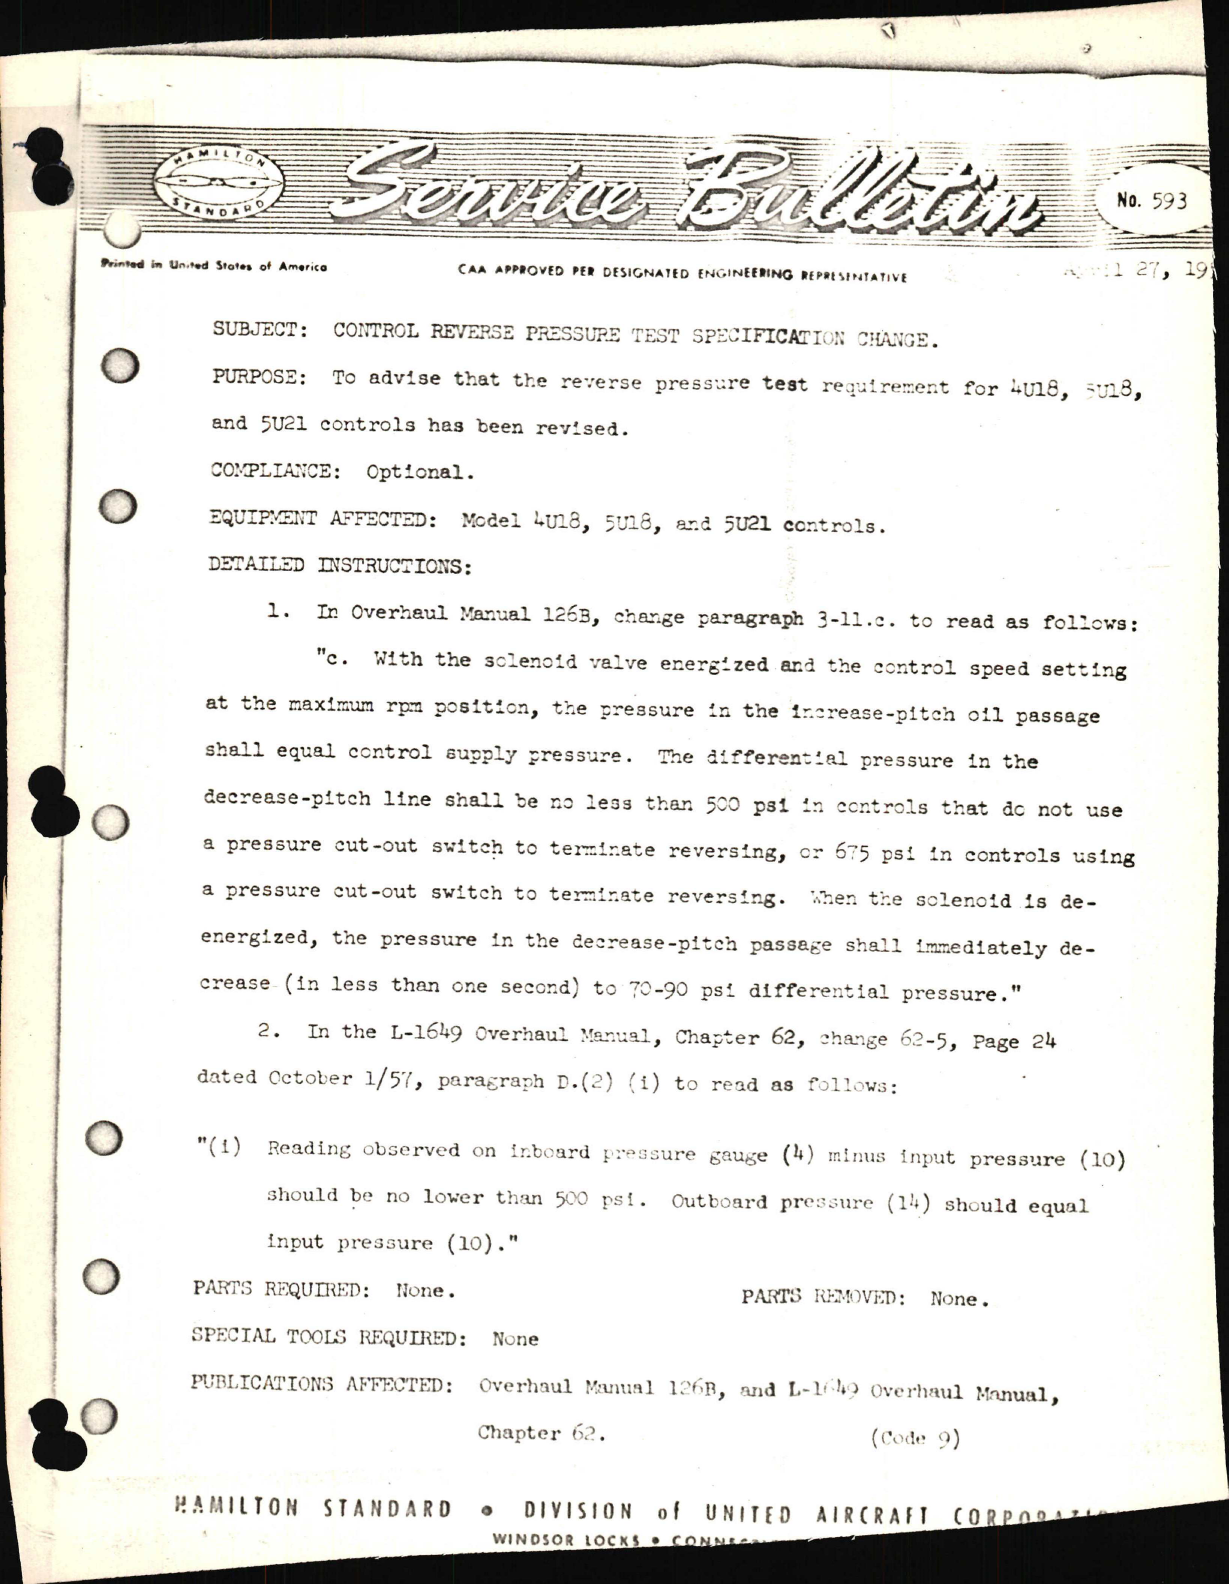 Sample page 1 from AirCorps Library document: Control Reverse Pressure Test Specification Change